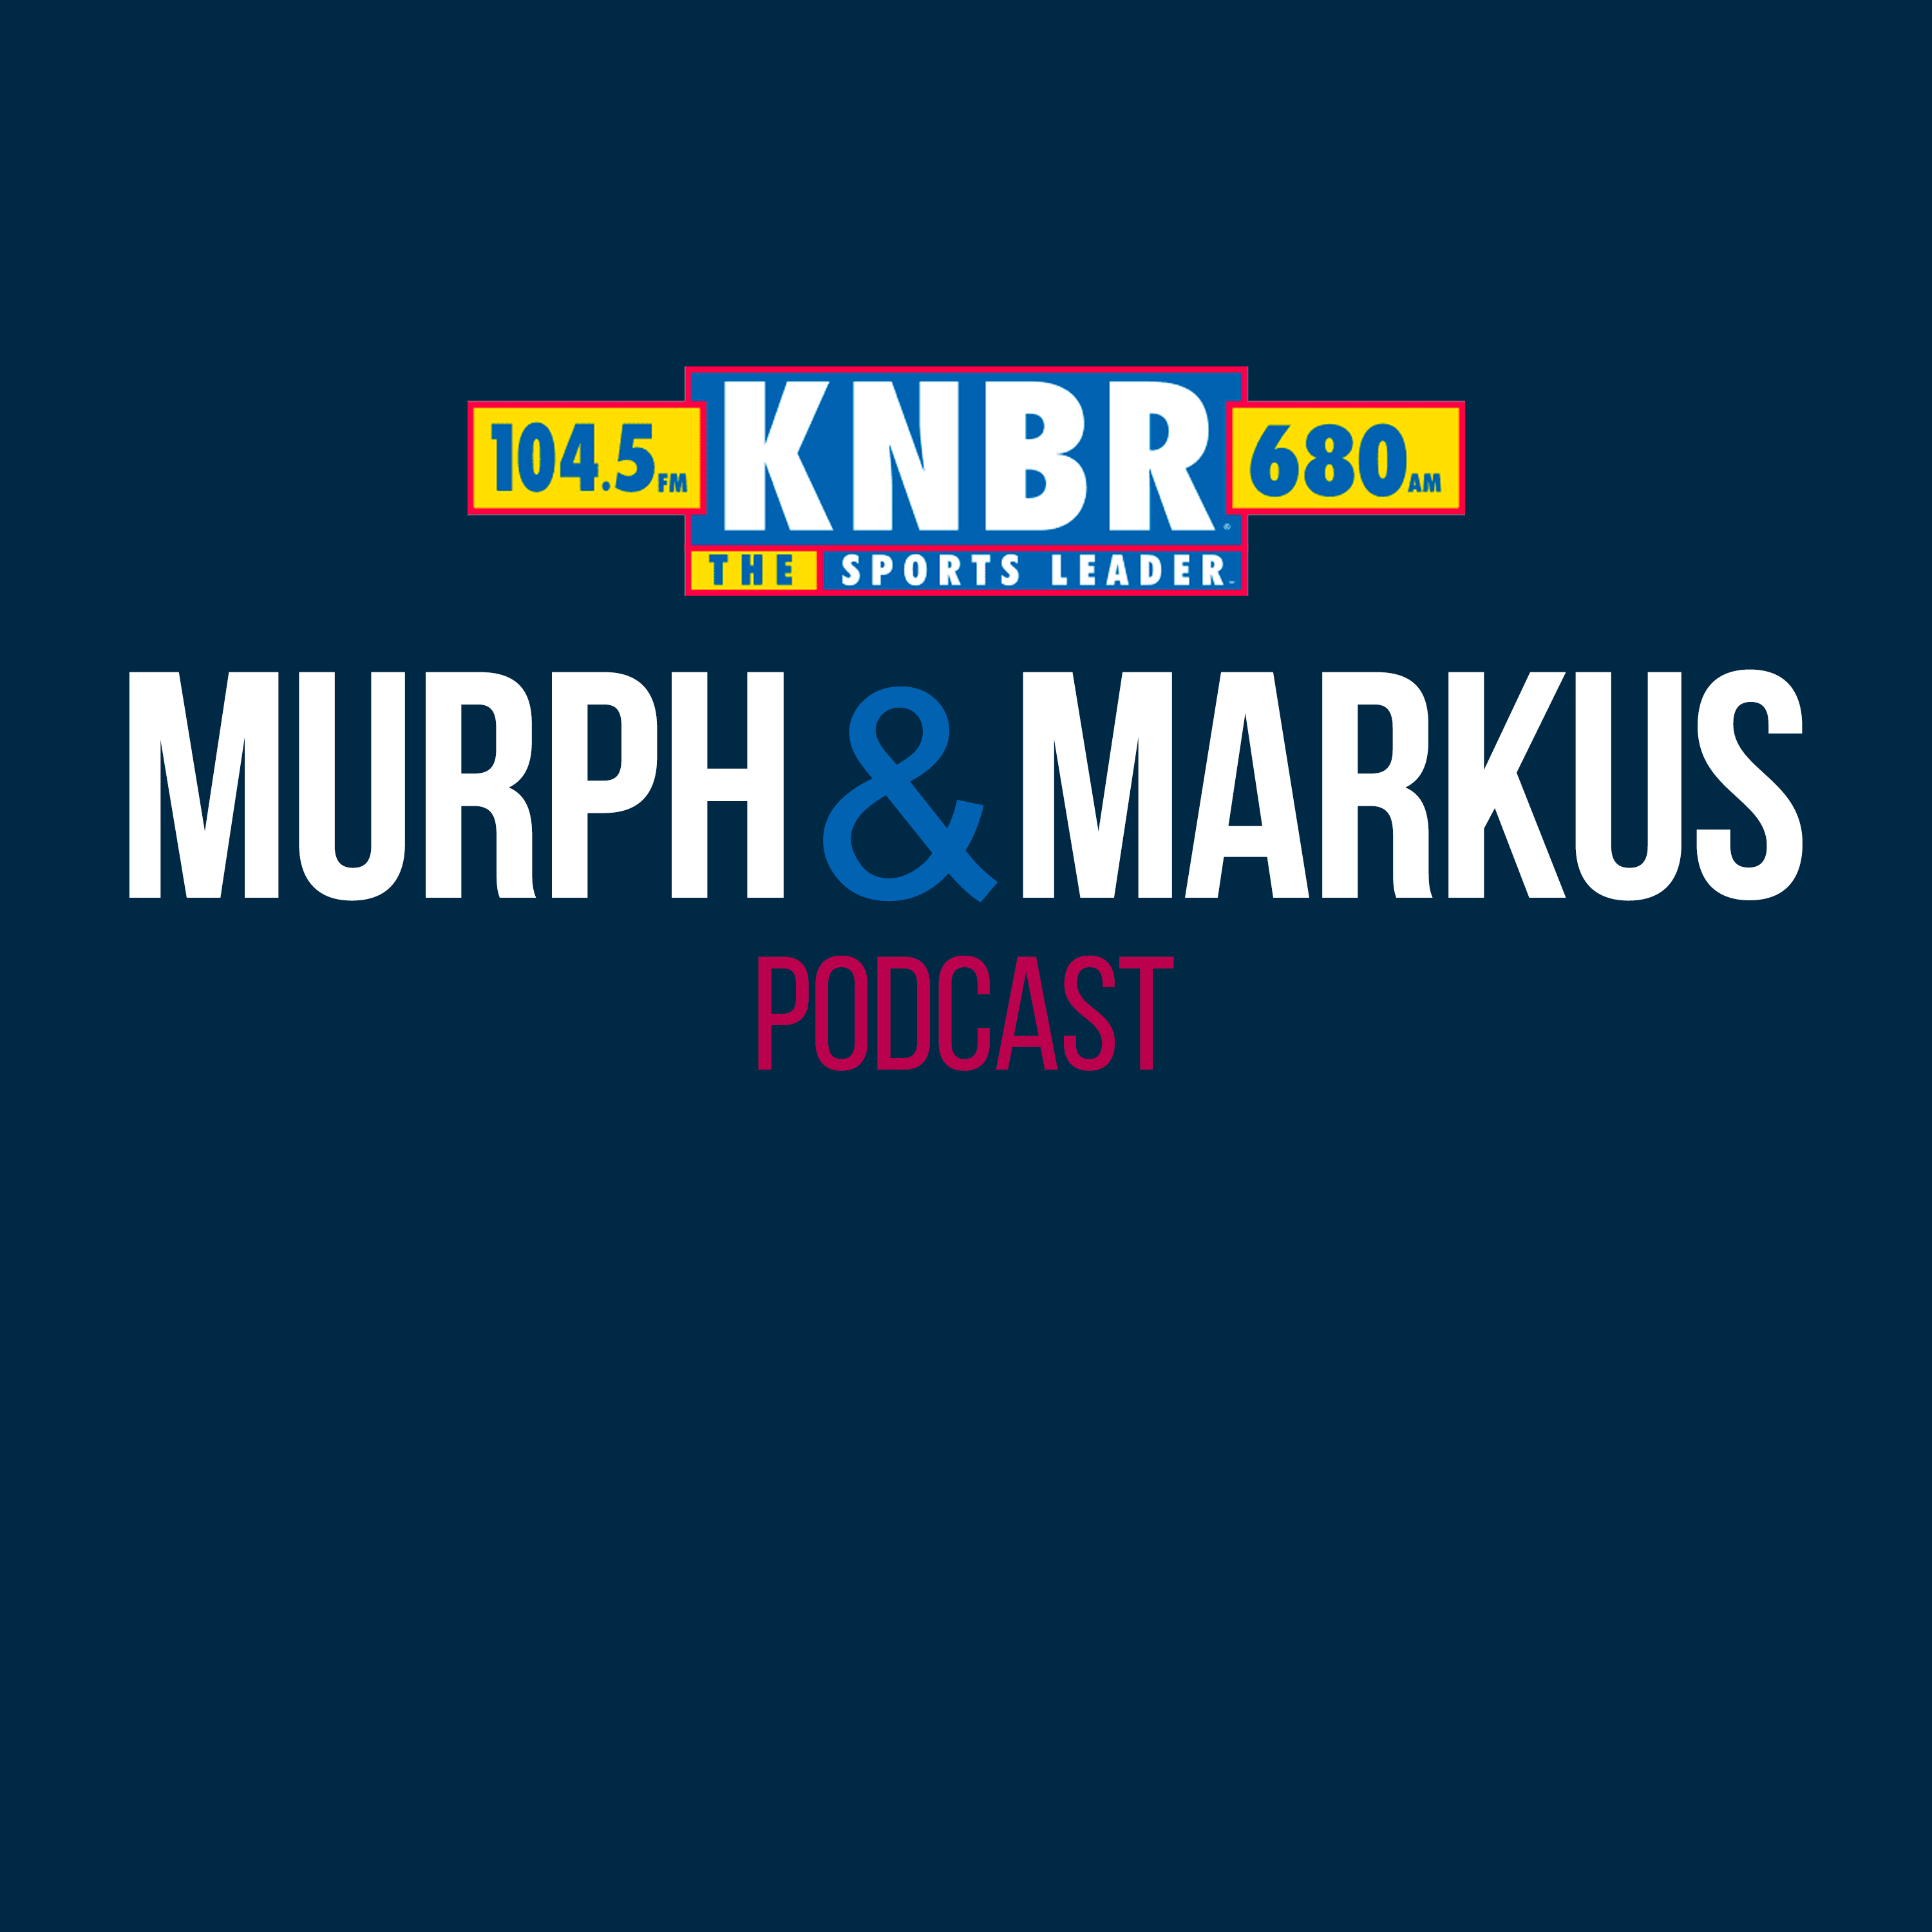 6-6 SF Giants legend, Will Clark joined Murph and Markus to discuss how the Giants can turn things around and why he isn't a fan of Matos getting called down to Triple-A